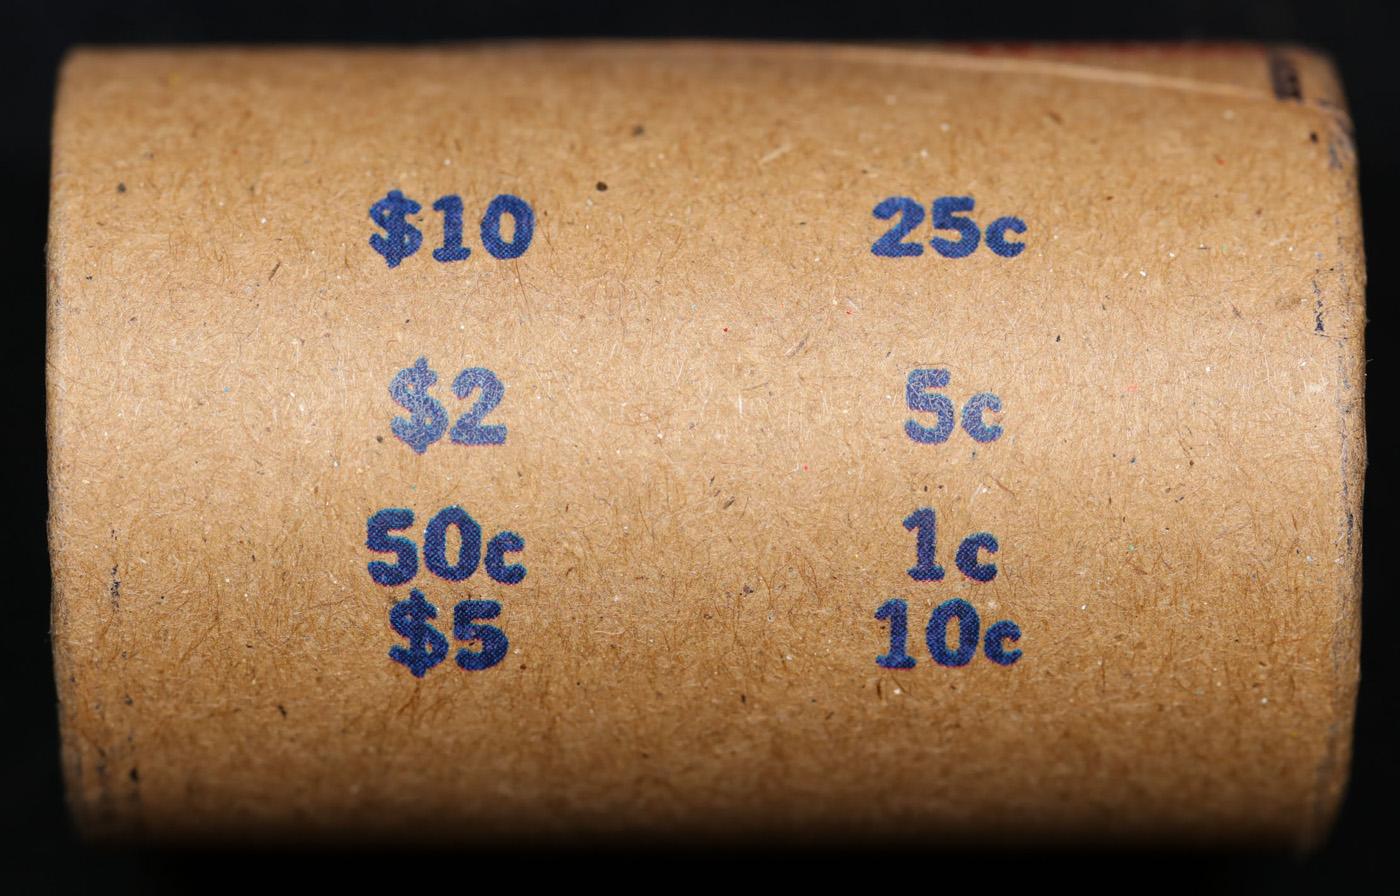 *EXCLUSIVE* Hand Marked " Peace Reserve," x20 coin Covered End Roll! - Huge Vault Hoard  (FC)